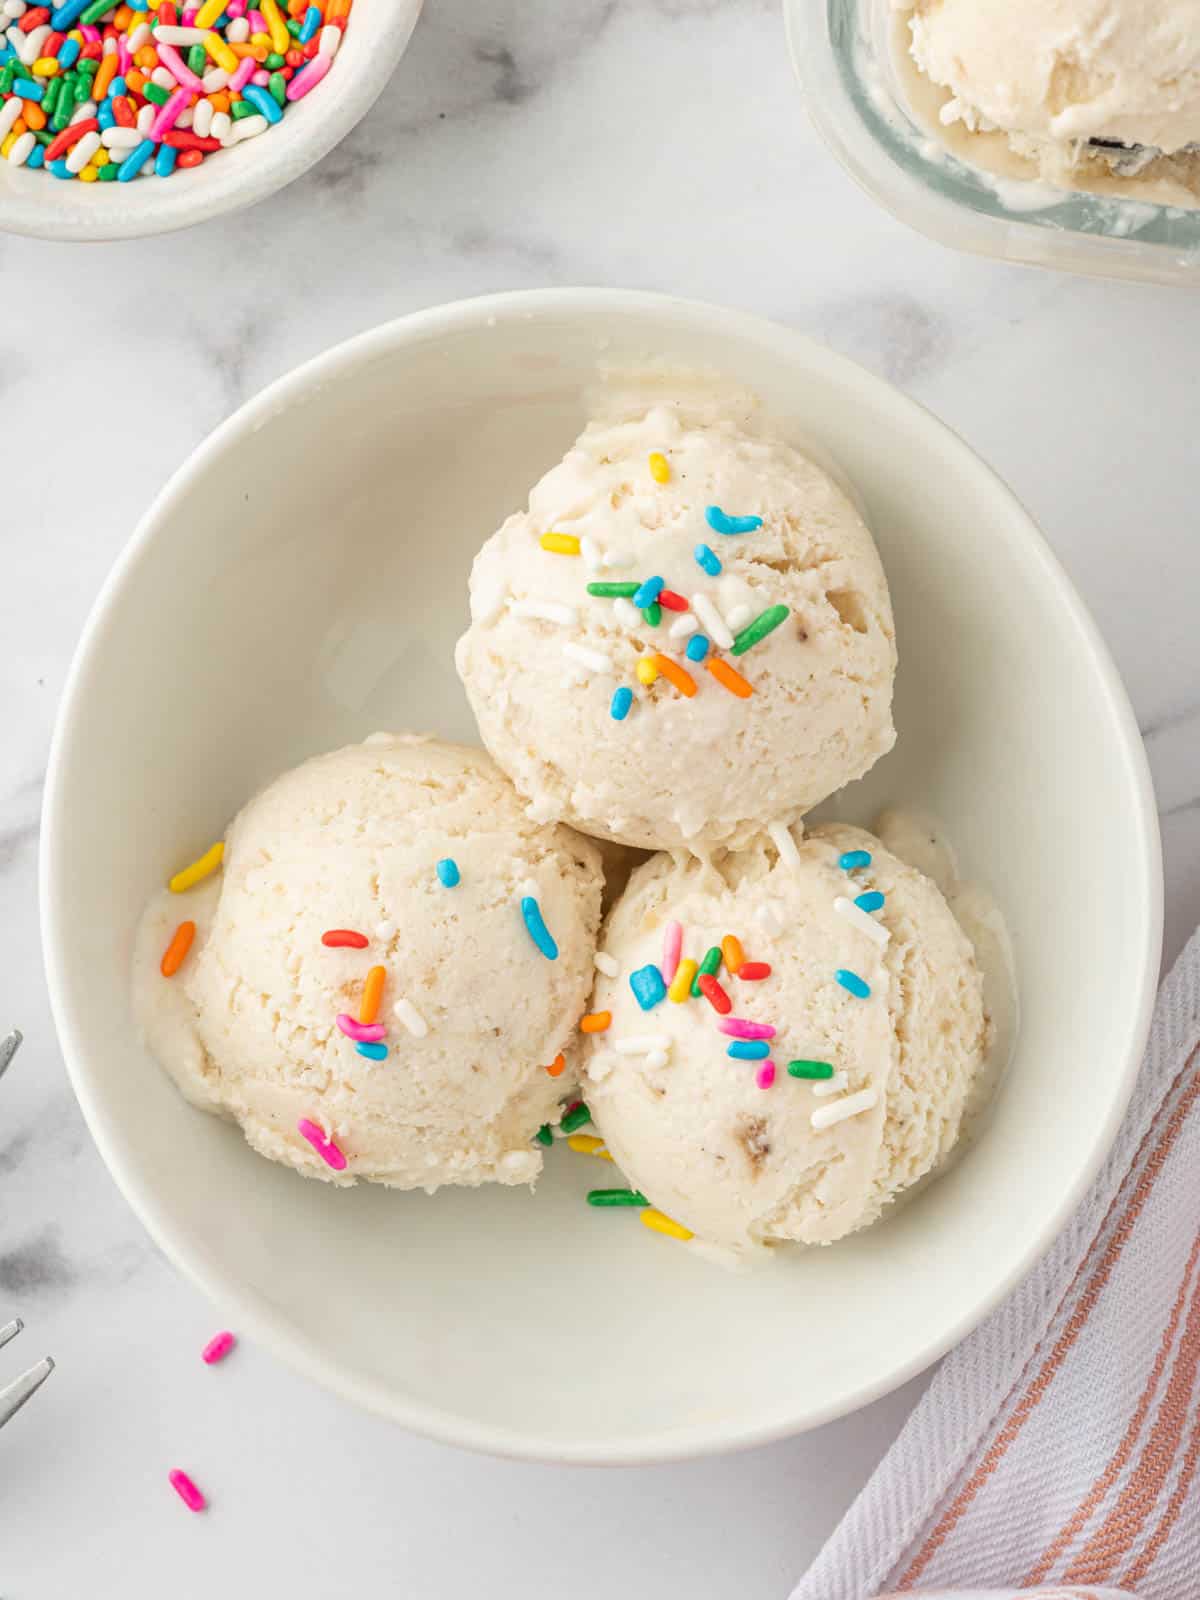 https://www.cookinwithmima.com/wp-content/uploads/2023/06/ice-cream-with-sprinkles.jpg